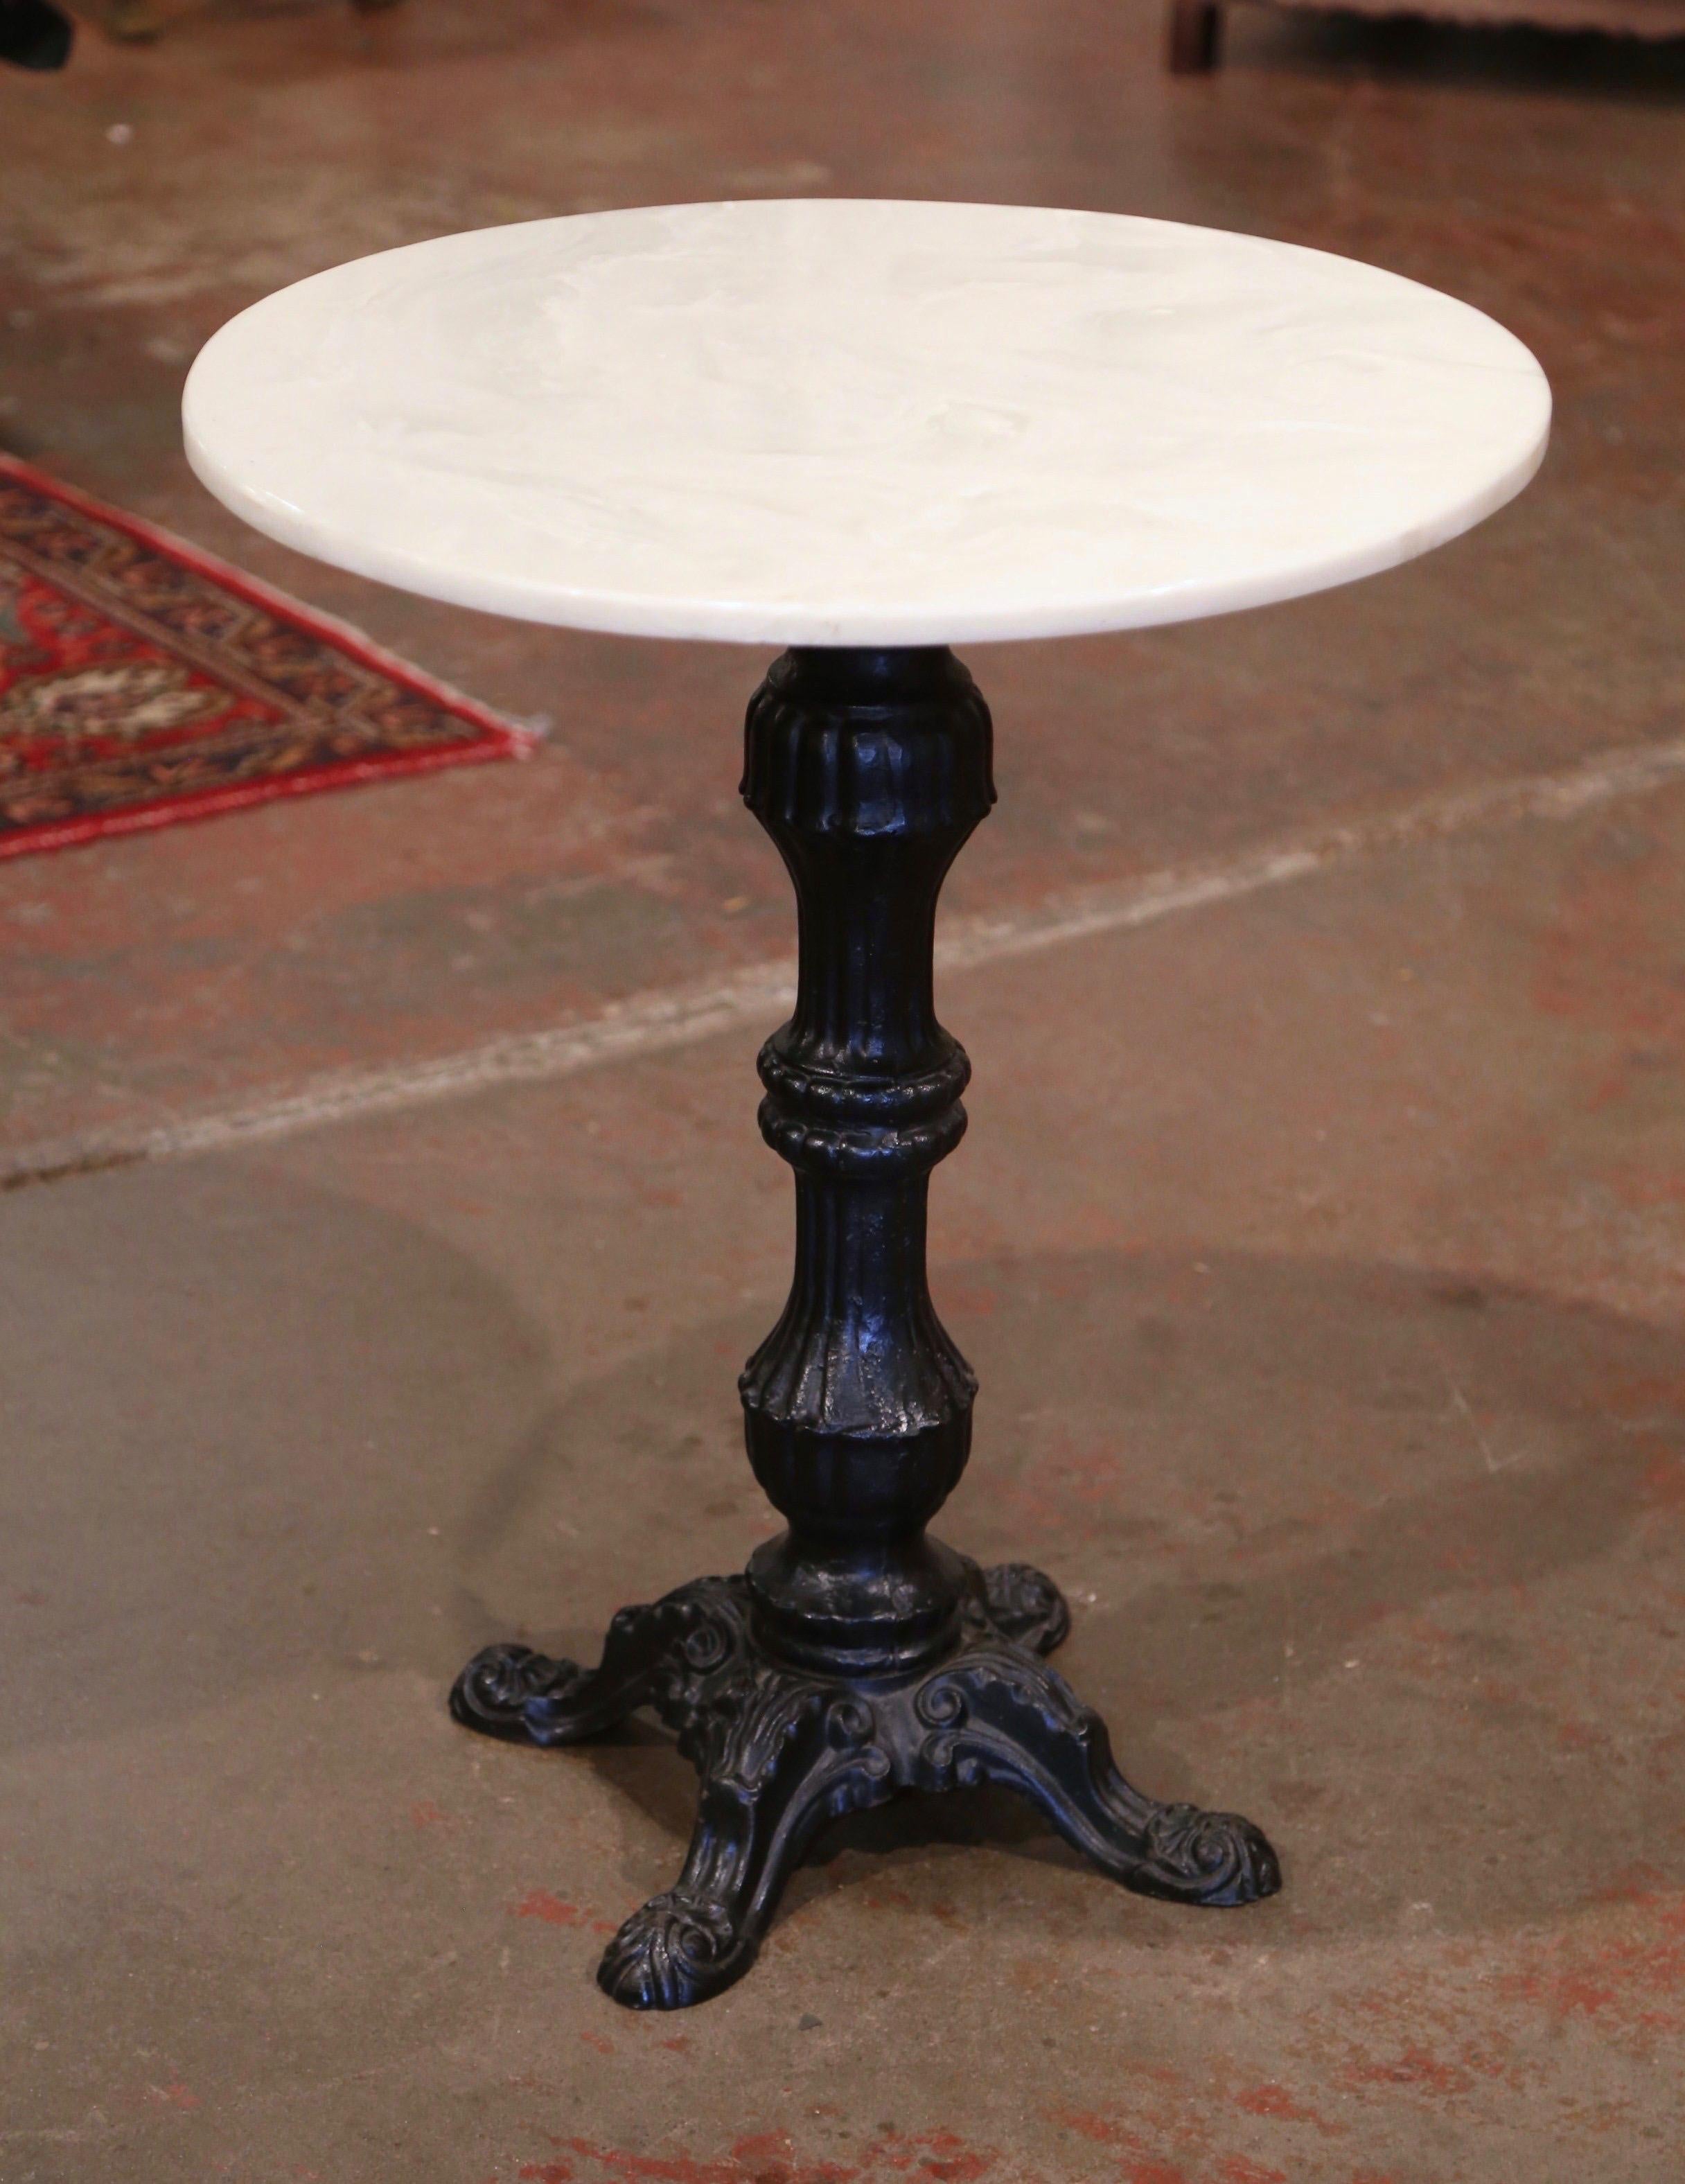 For a touch of French flair and a Parisian look, decorate a patio or a garden with this exquisite antique bistrot table; crafted in France, circa 1890, the guéridon stands on an intricate carved iron pedestal with four feet at the base. The top is